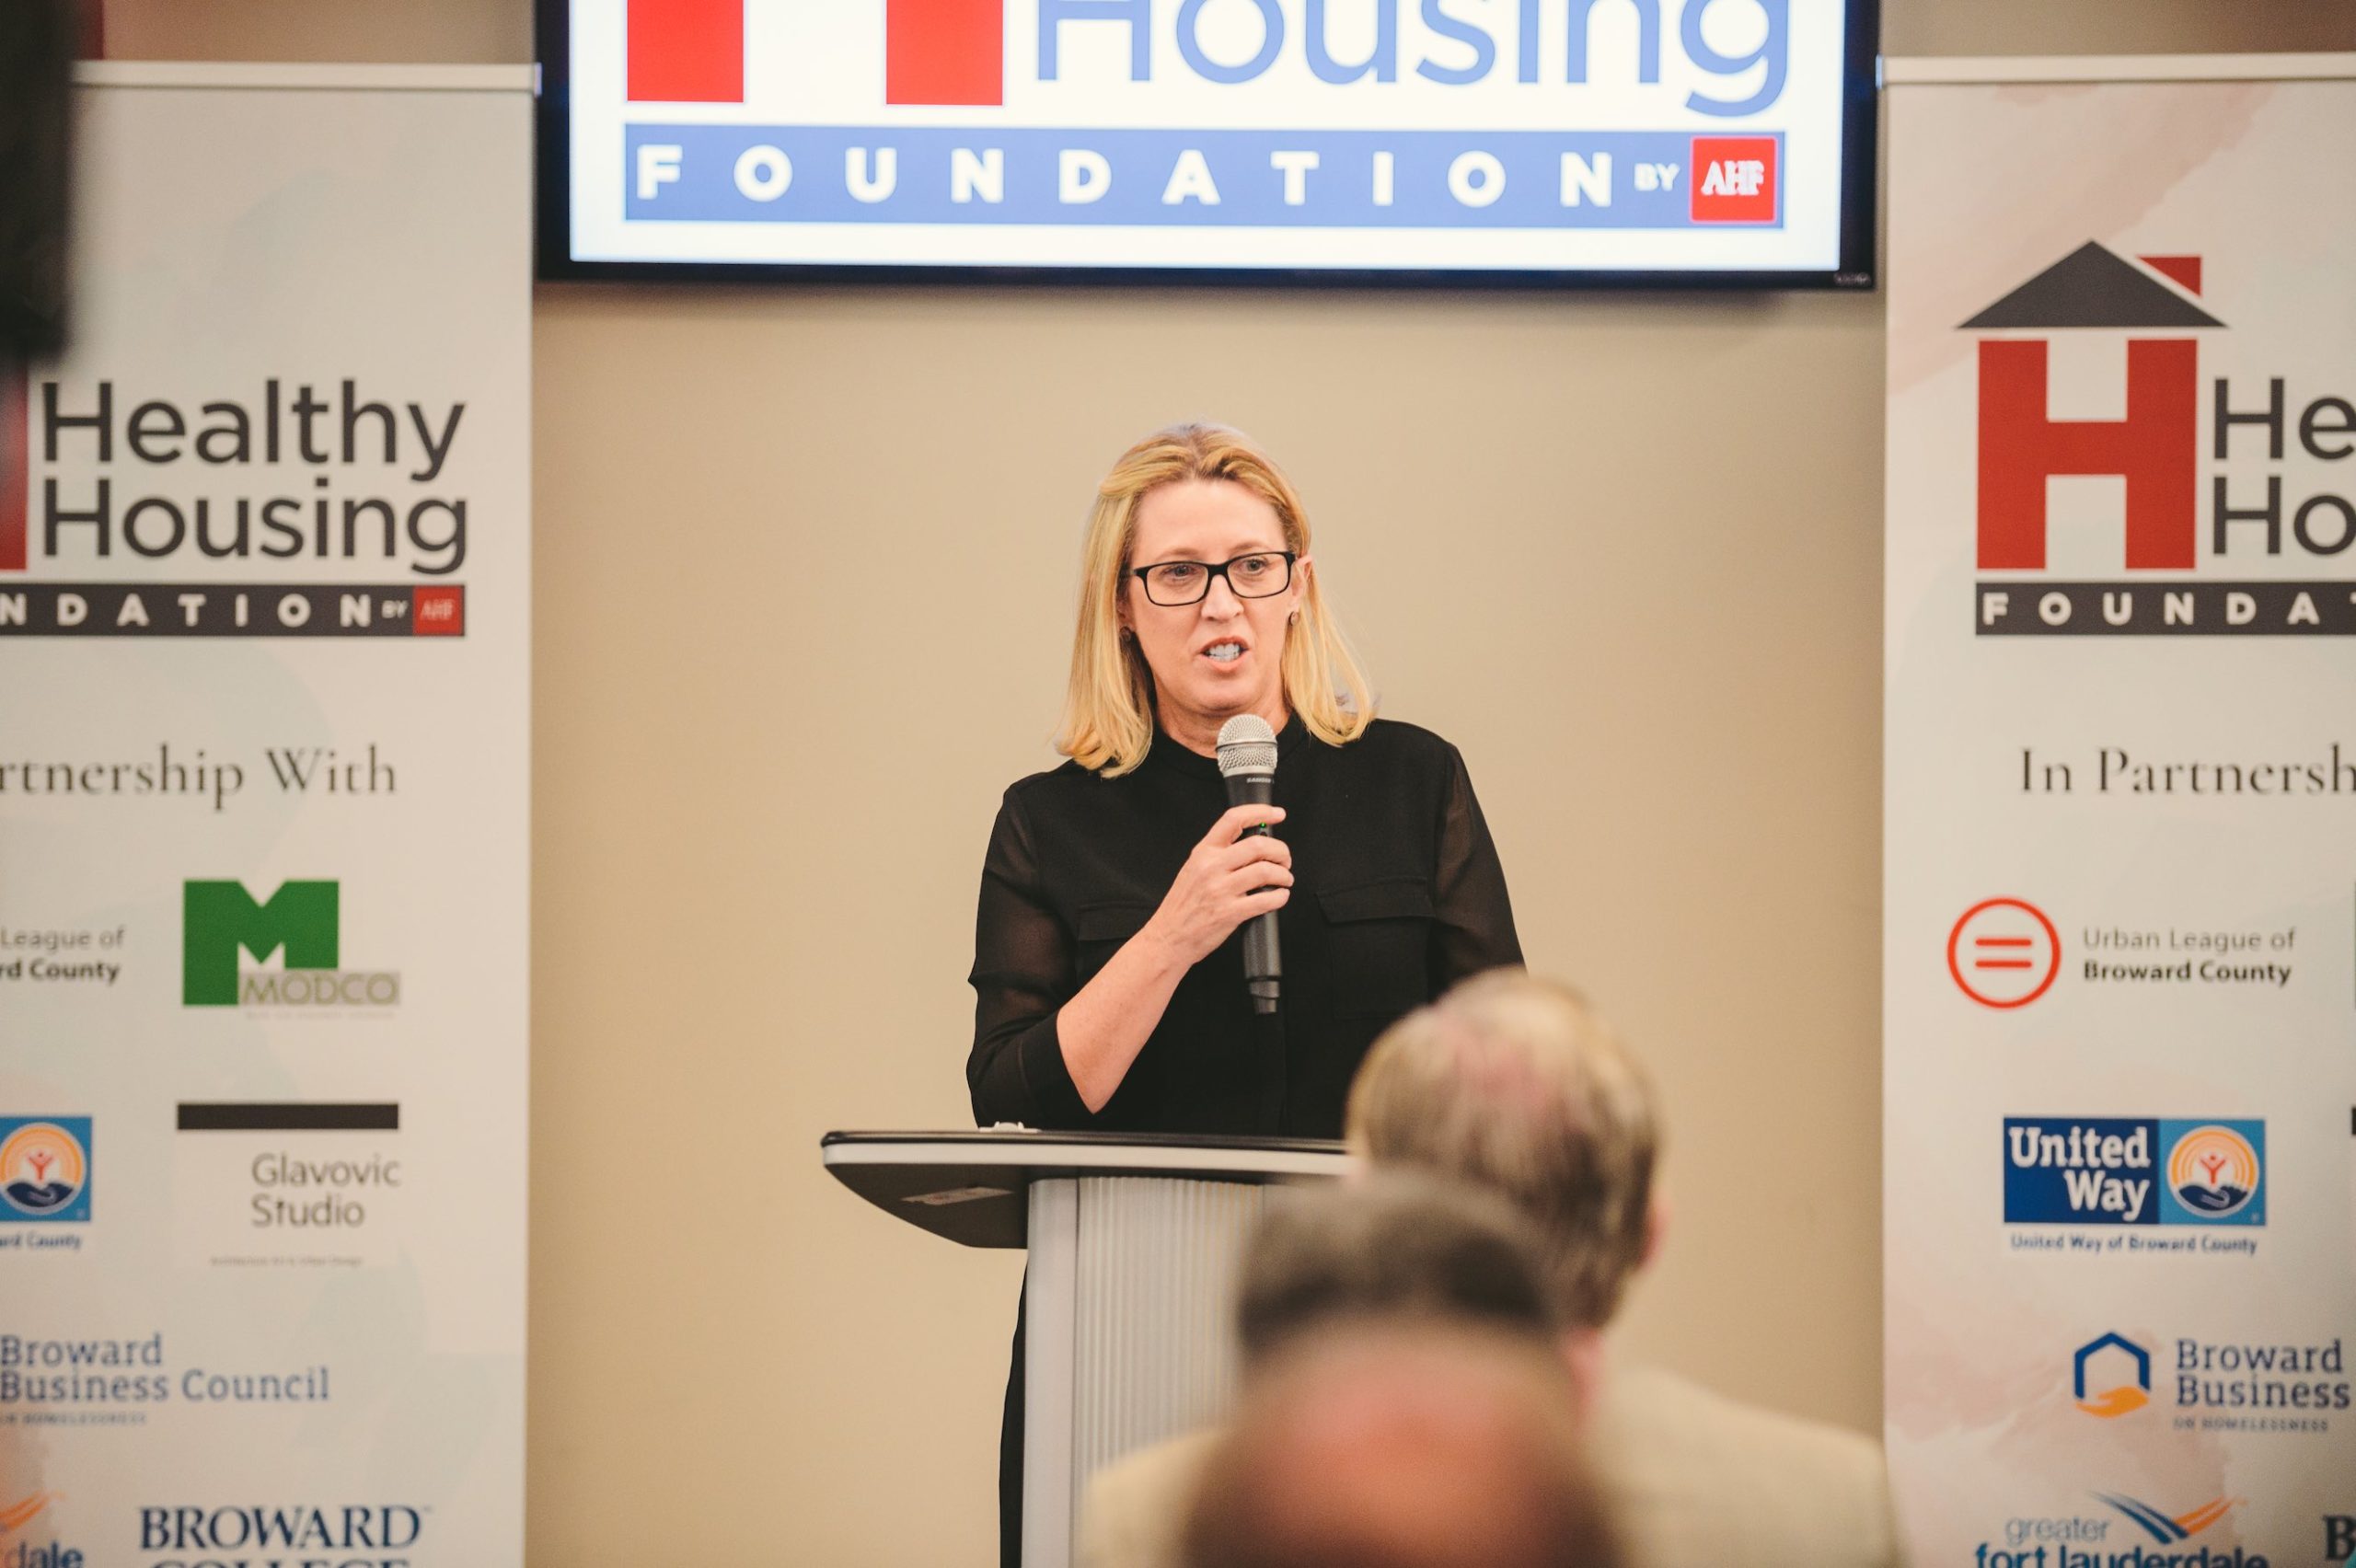 Woman speaking to audience at Healthy Housing Foundation event